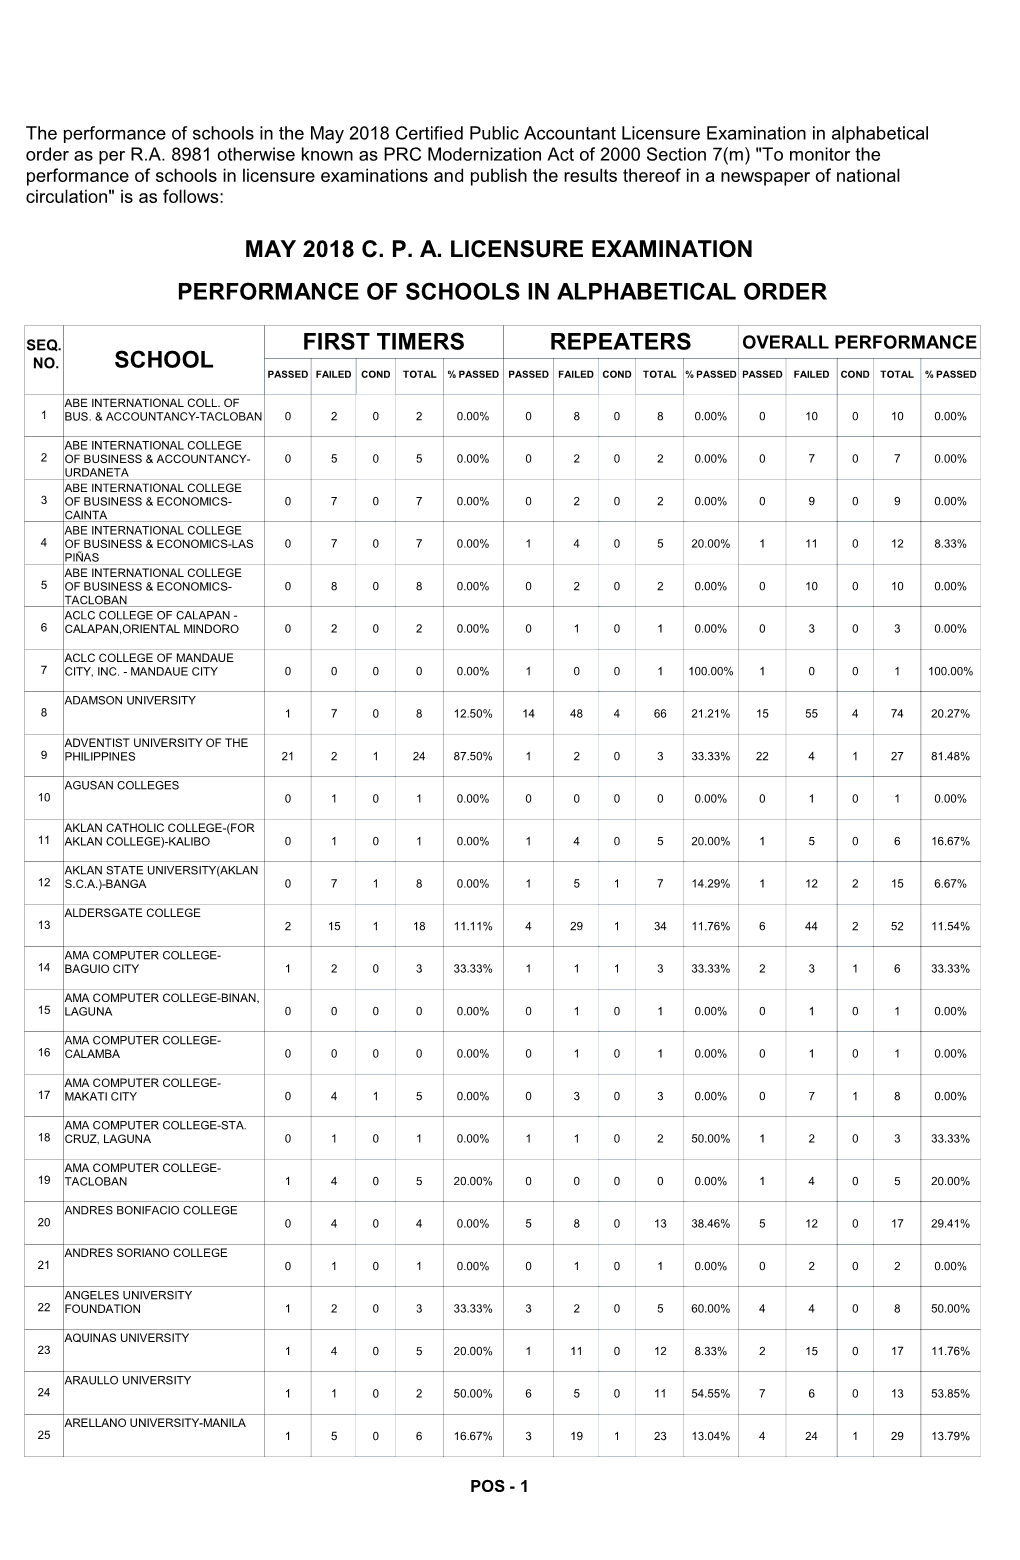 The Performance of Schools in the May 2018 Certified Public Accountant Licensure Examination in Alphabetical Order As Per R.A